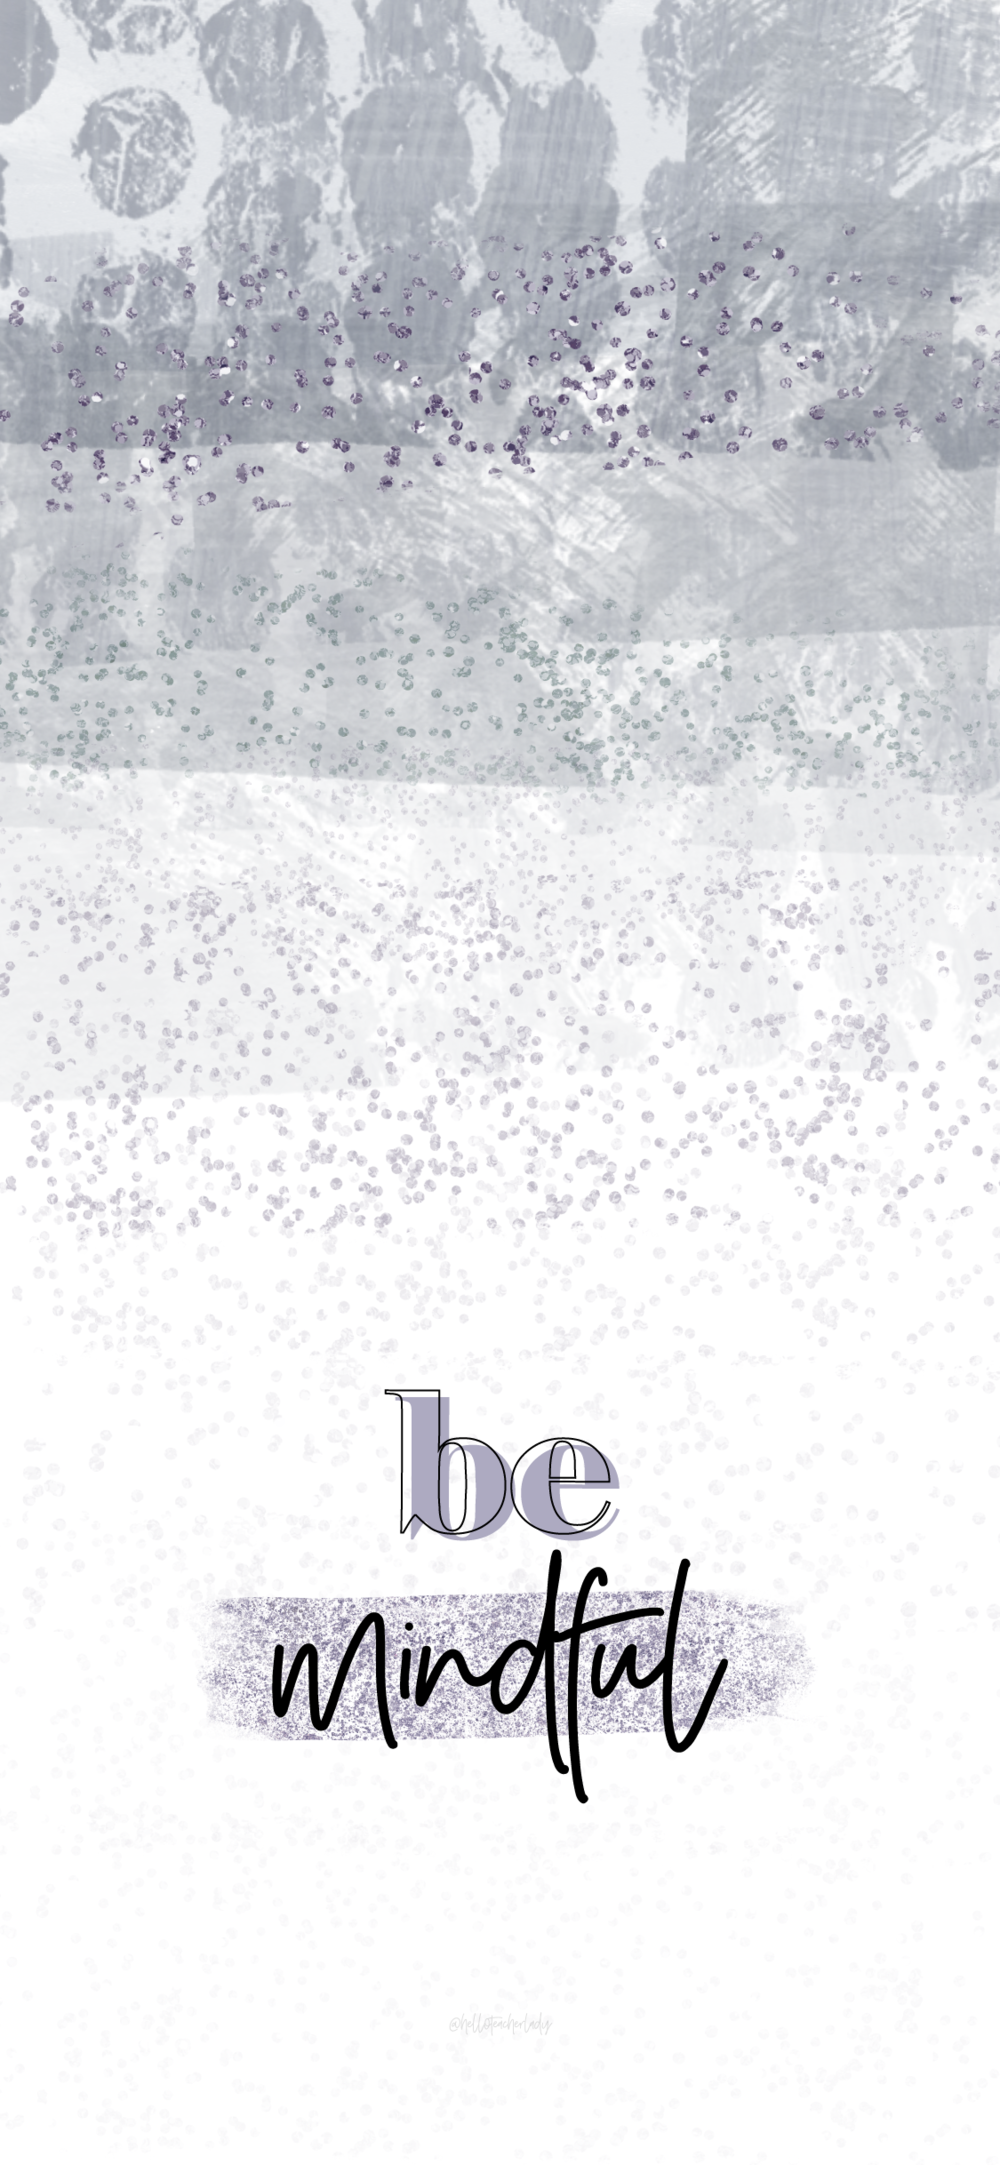 Be Balanced, Joyful, Courageous: Celebrate 2020 With One Word Wallpaper For Your Phone ✨